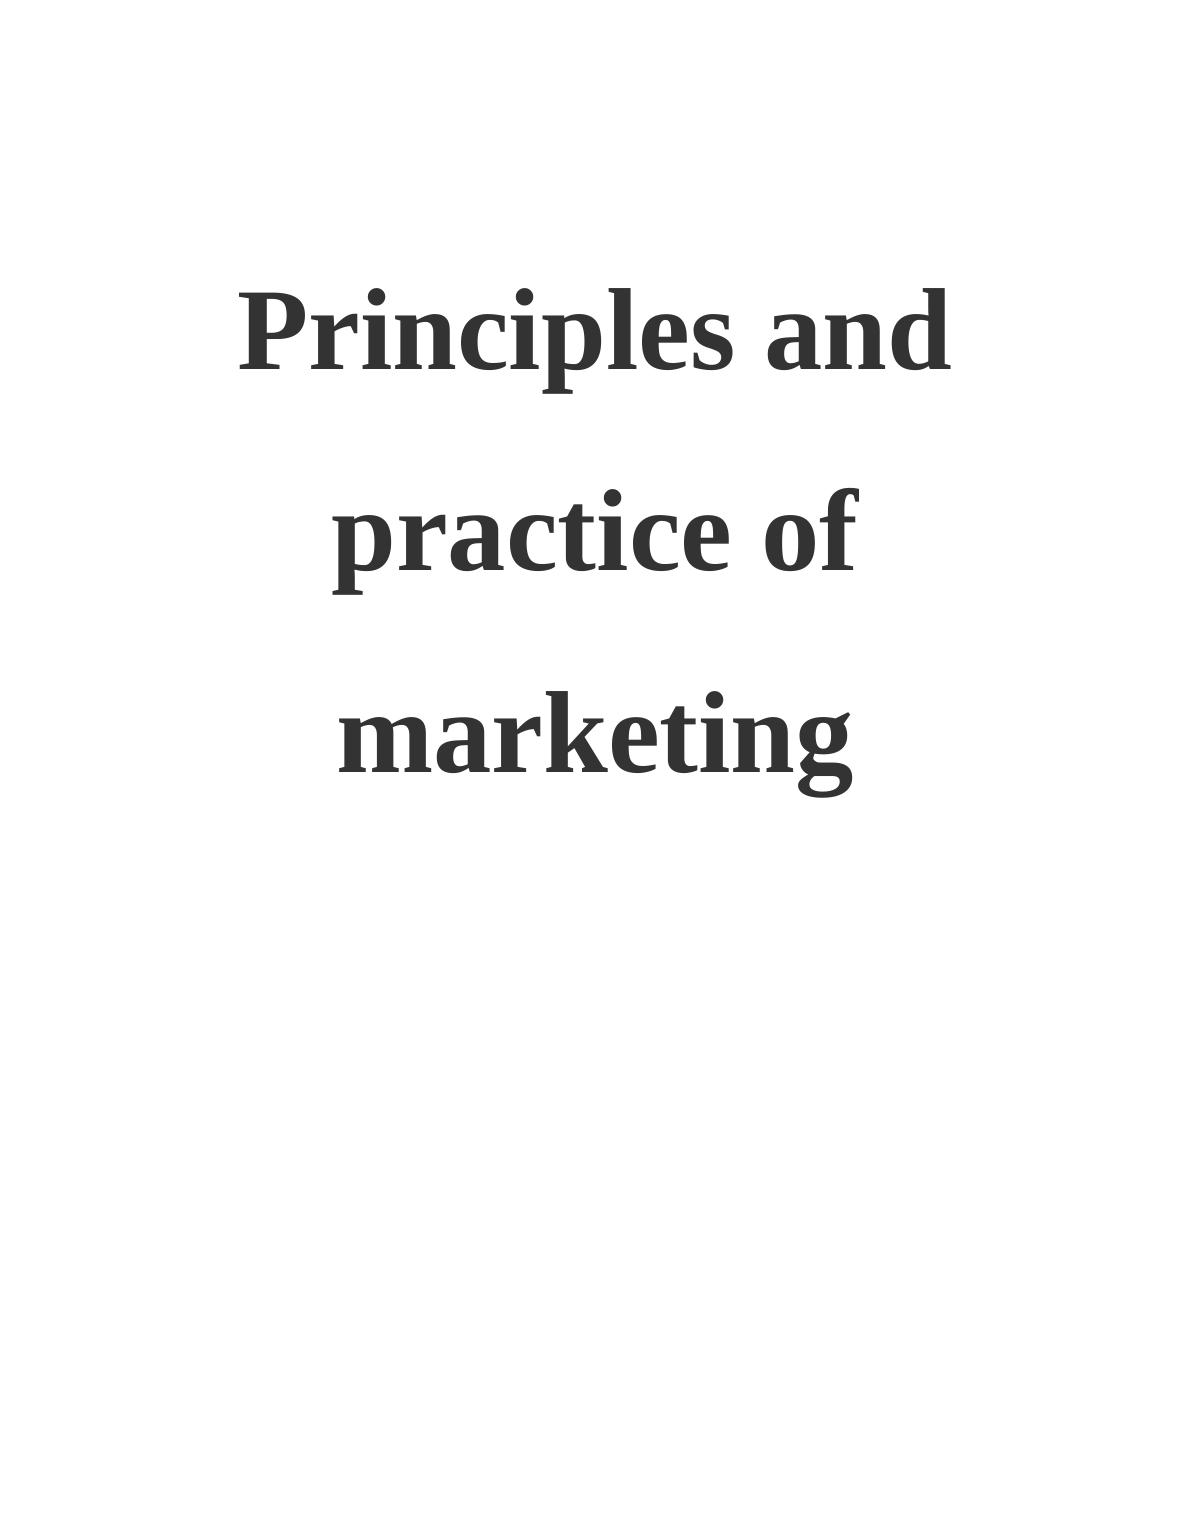 Principles and practice of marketing - Marks & Spencer Assignment_1